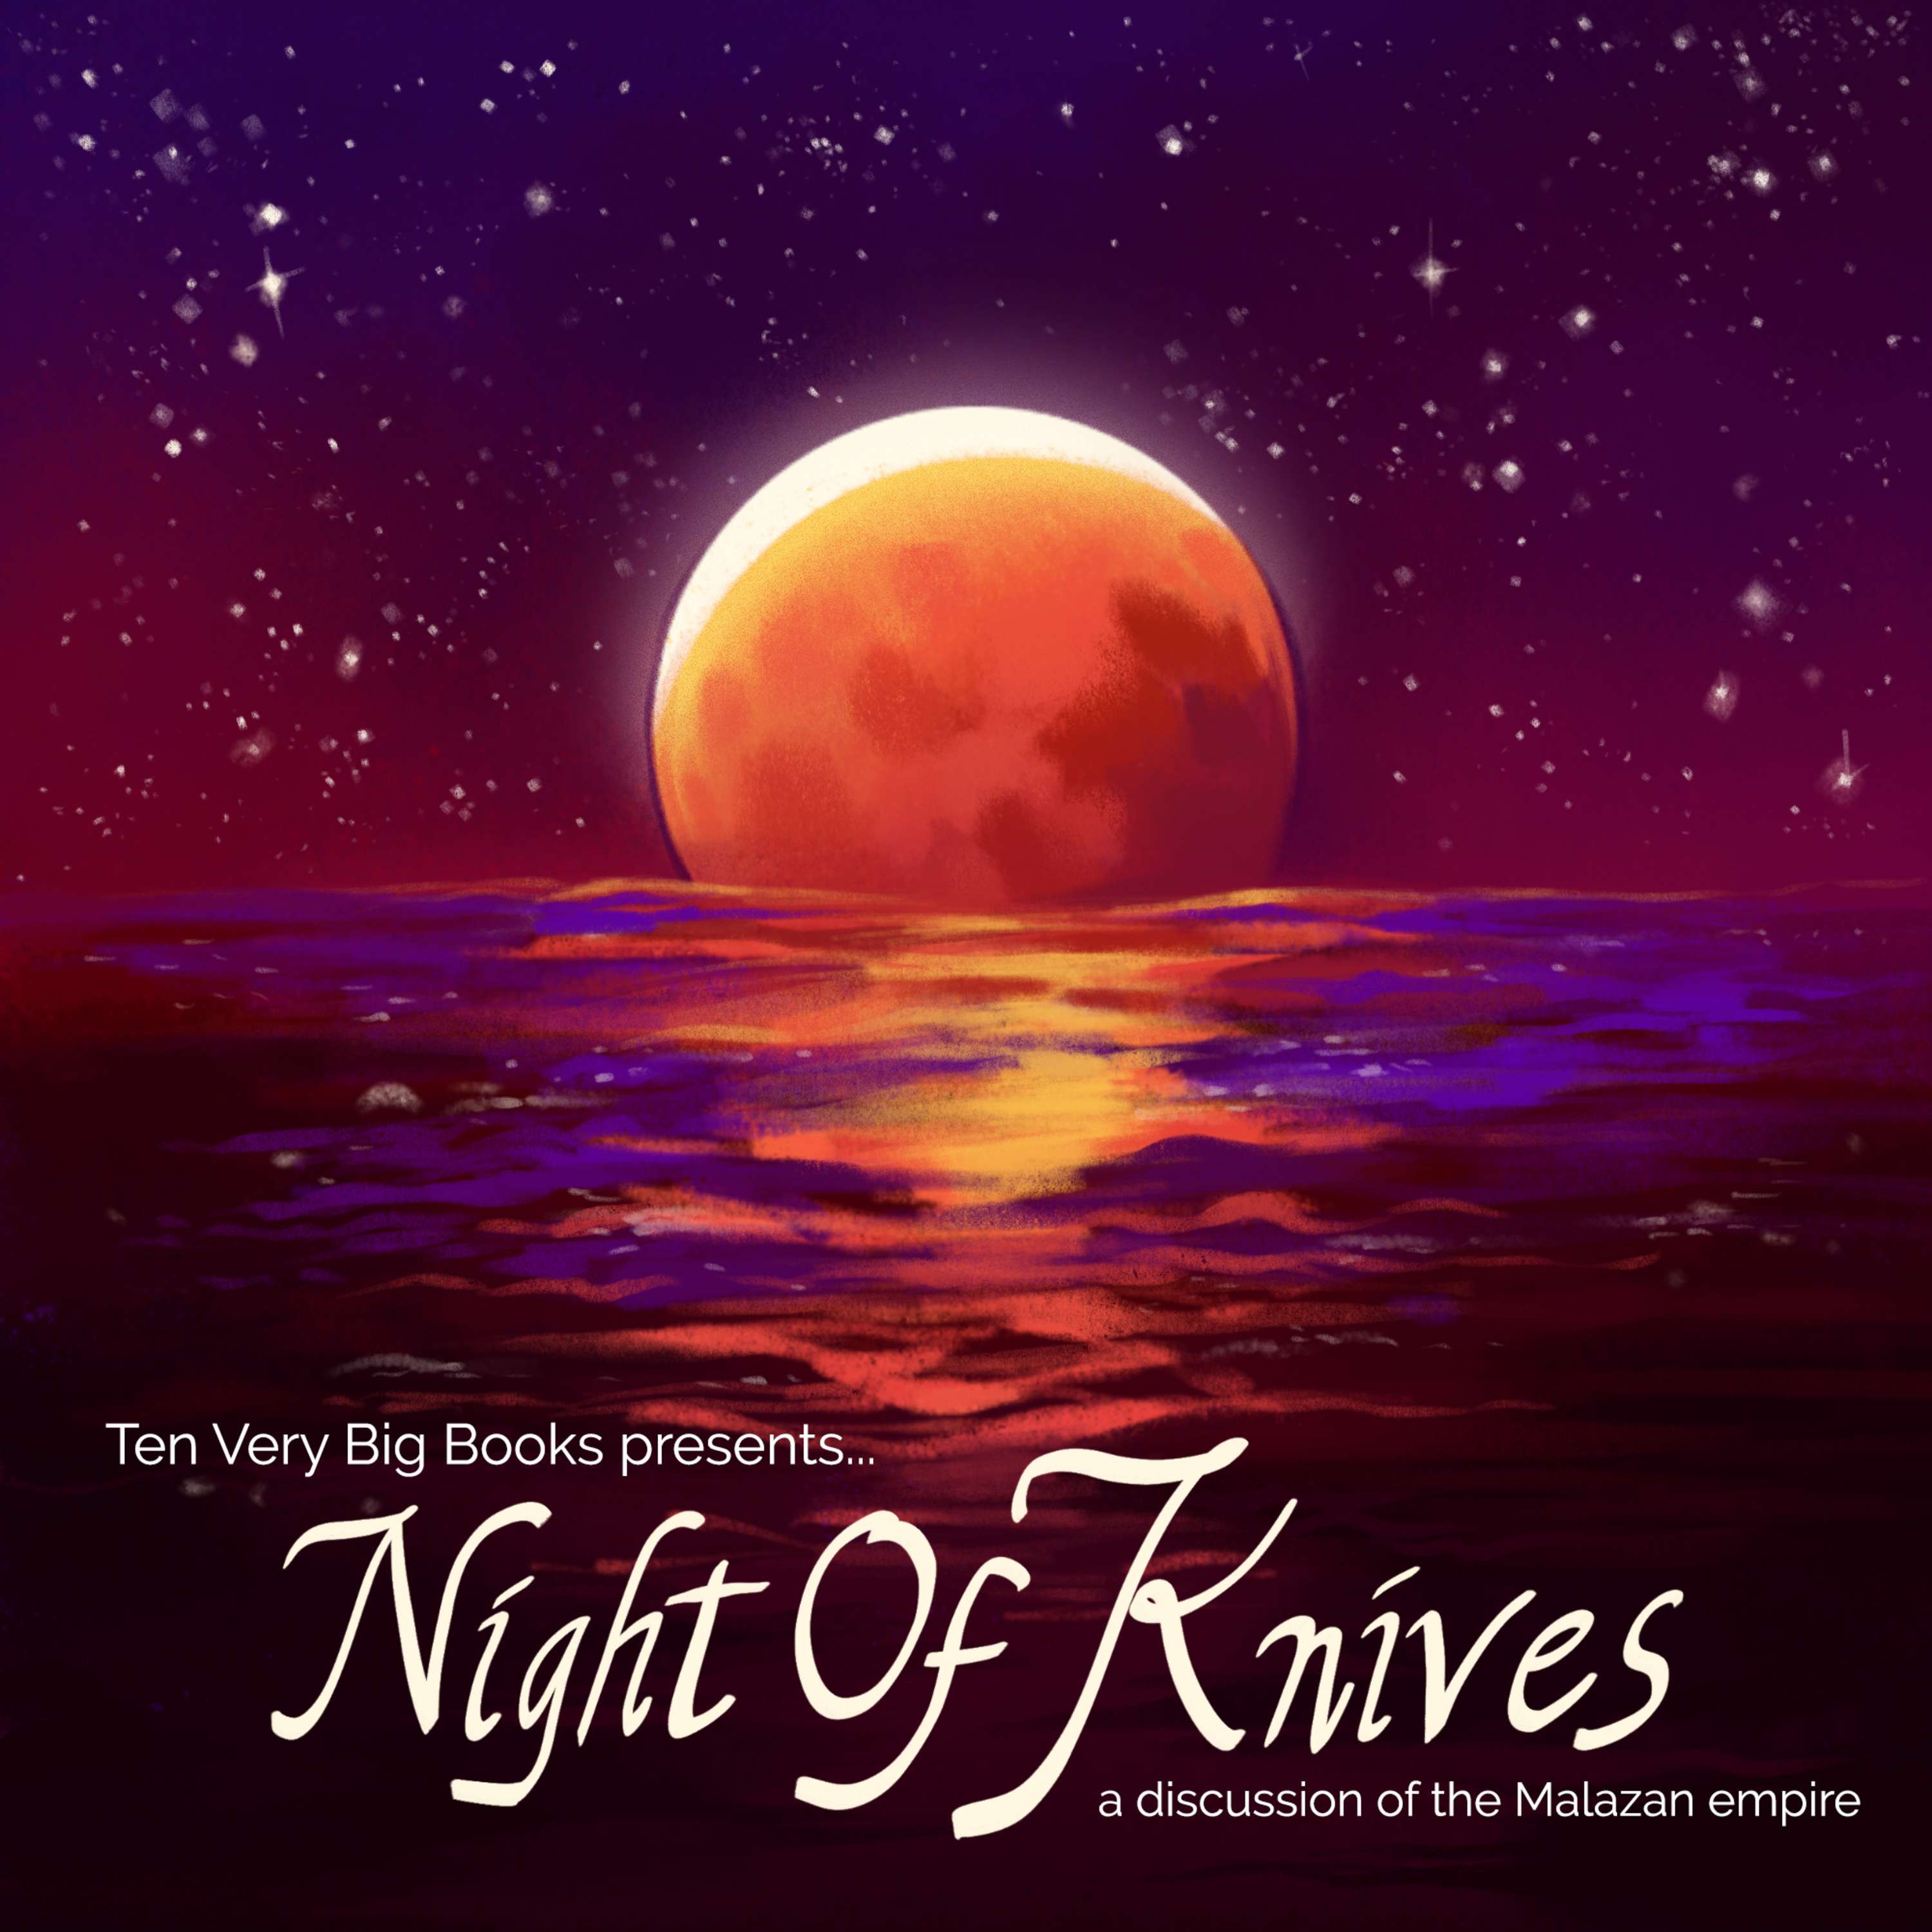 Night of Knives | Discussions of the Malazan Empire